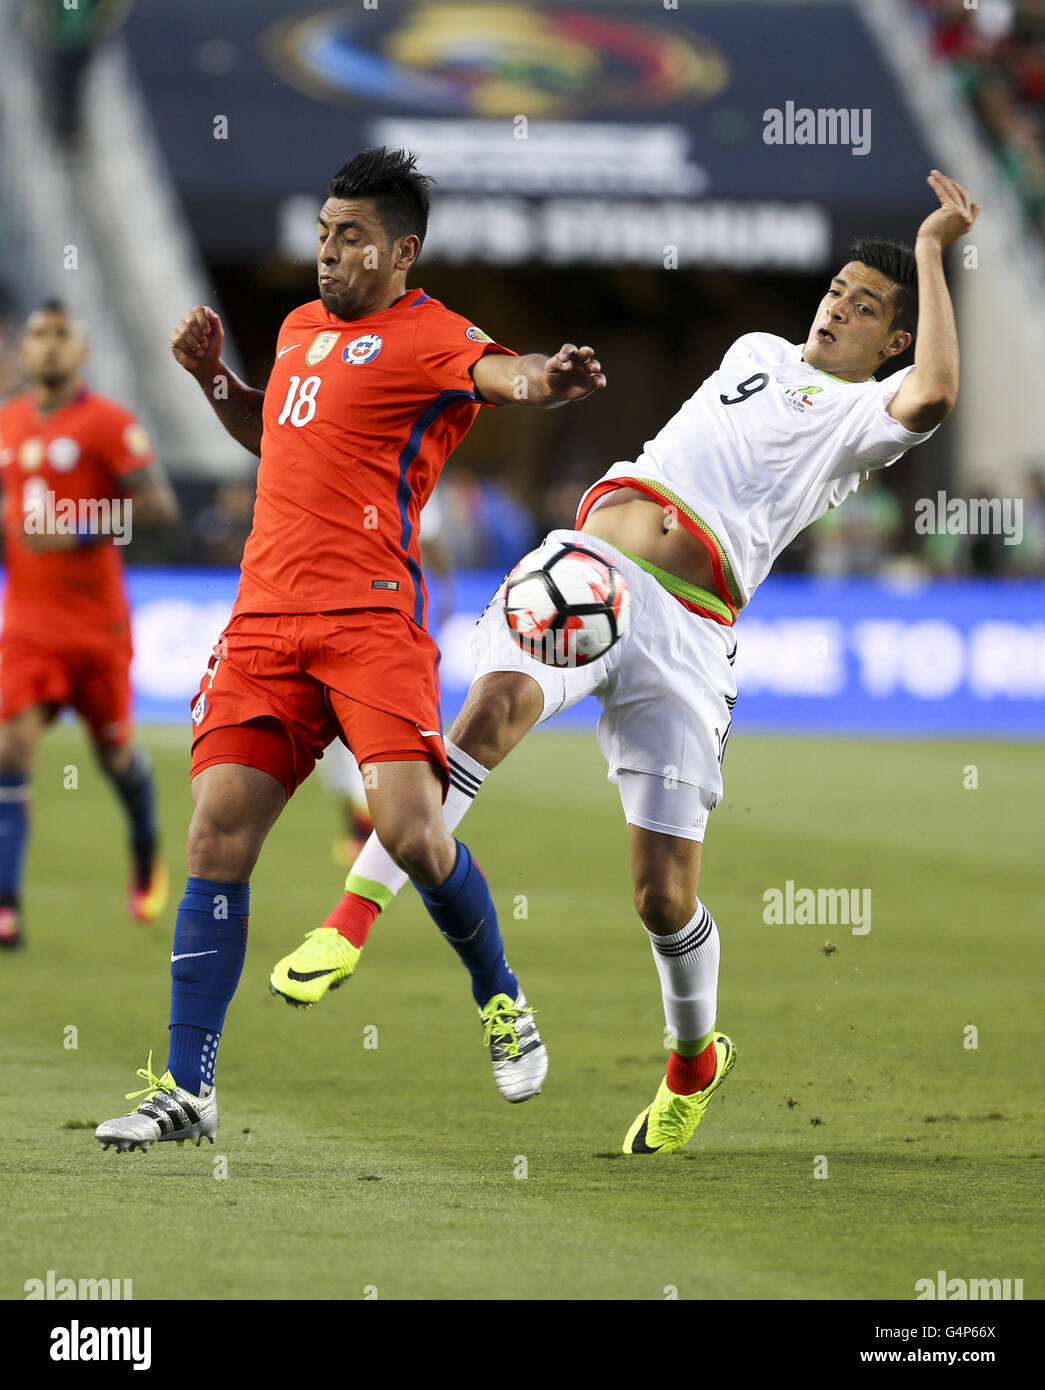 Los Angeles, California, USA. 18th June, 2016. Chile defender Gonzalo Jara #18 vies the ball against Mexico forward Raul Jimenez #9 in the Copa America soccer match between Mexico and Chile at the Levi's Stadium in Santa Clara, California, June 18, 2016. Chile won 7-0. Credit:  Ringo Chiu/ZUMA Wire/Alamy Live News Stock Photo